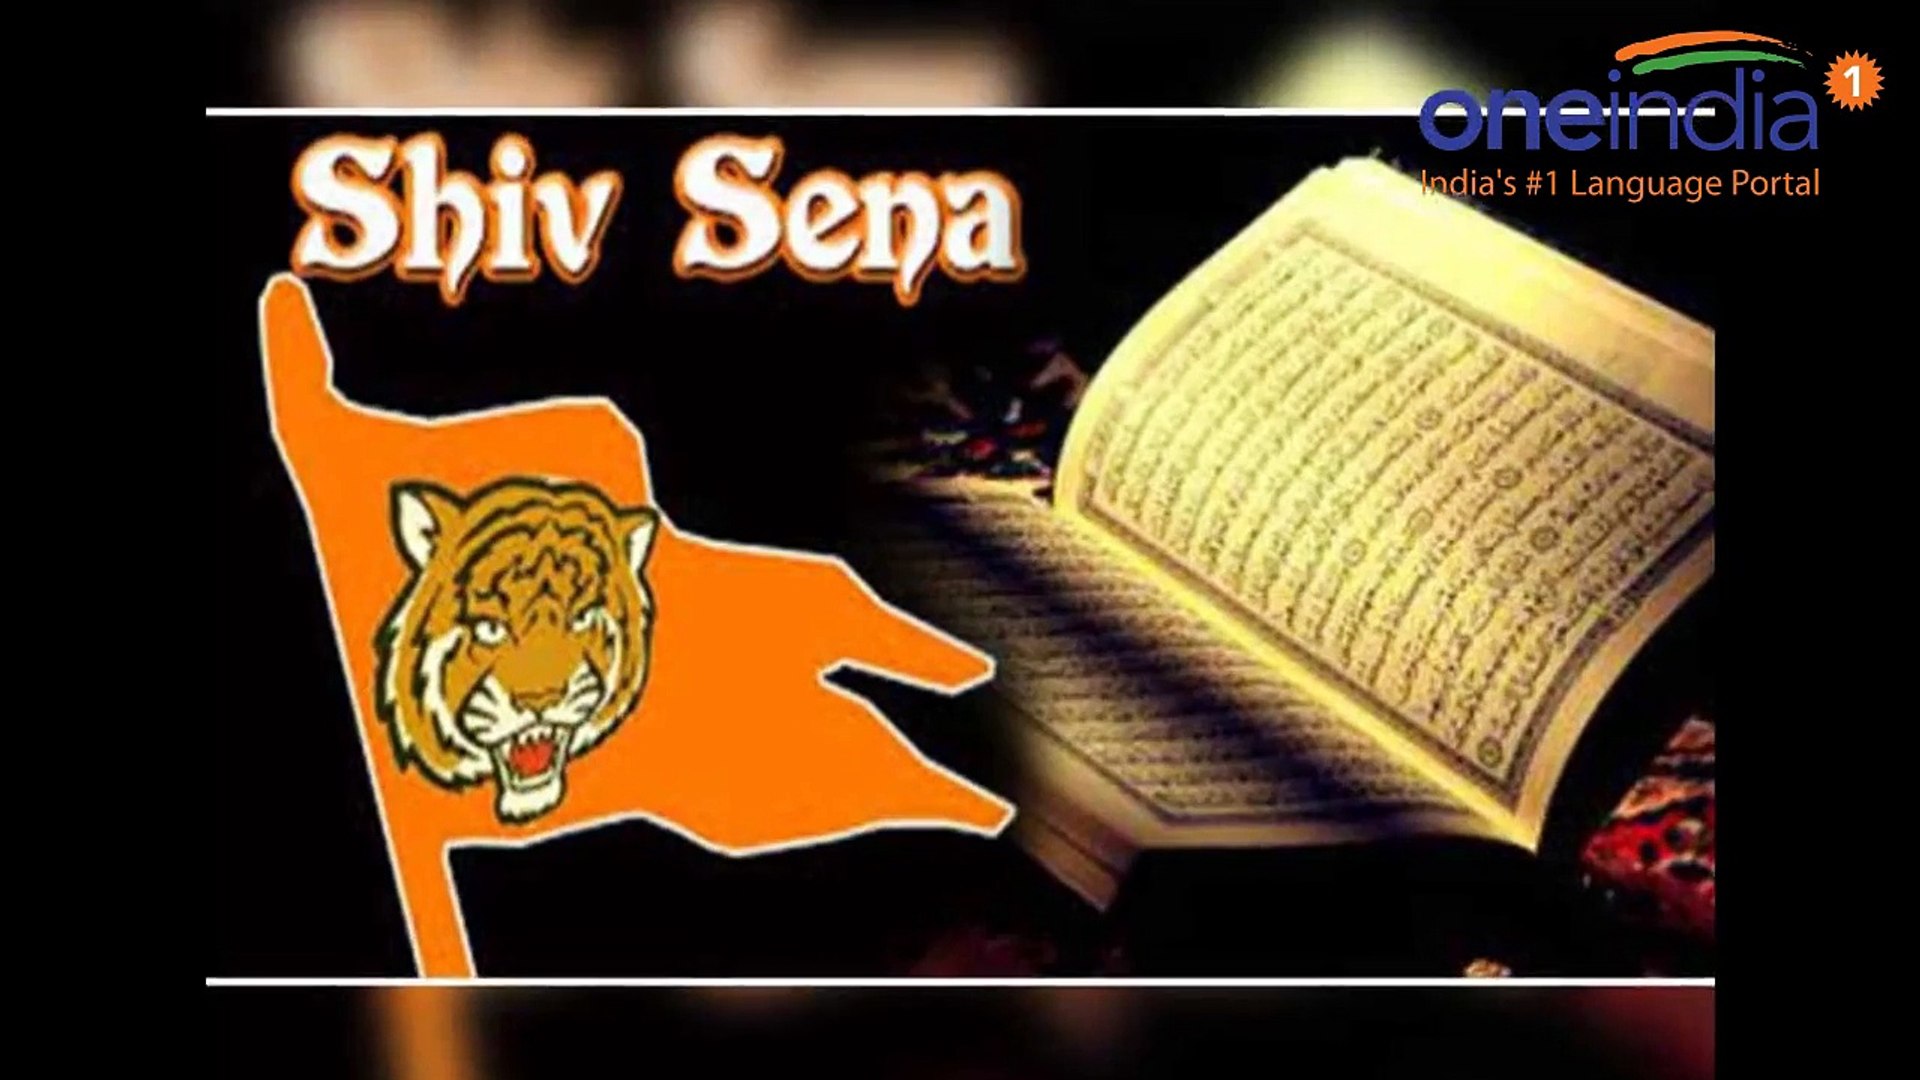 Shiv Sena Leader Converts To Islam After Disappointment - Quran , HD Wallpaper & Backgrounds